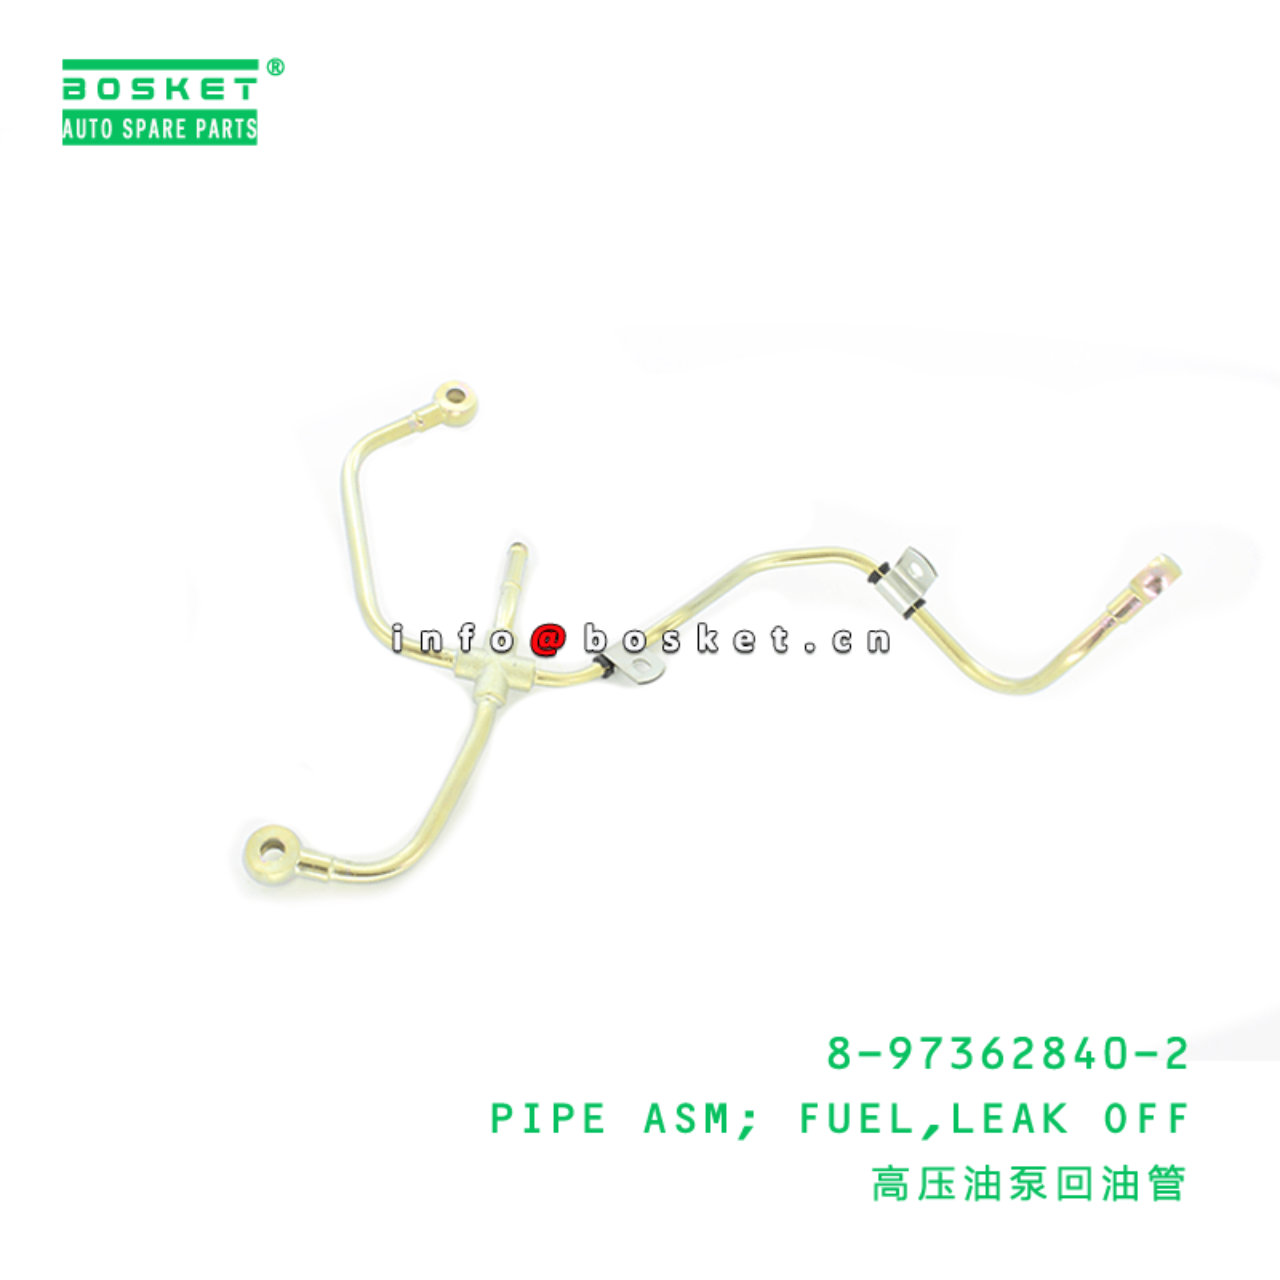 8-97362840-2 Leak Off Fuel Pipe Assembly Suitable for ISUZU XD 4HK1 8973628402 